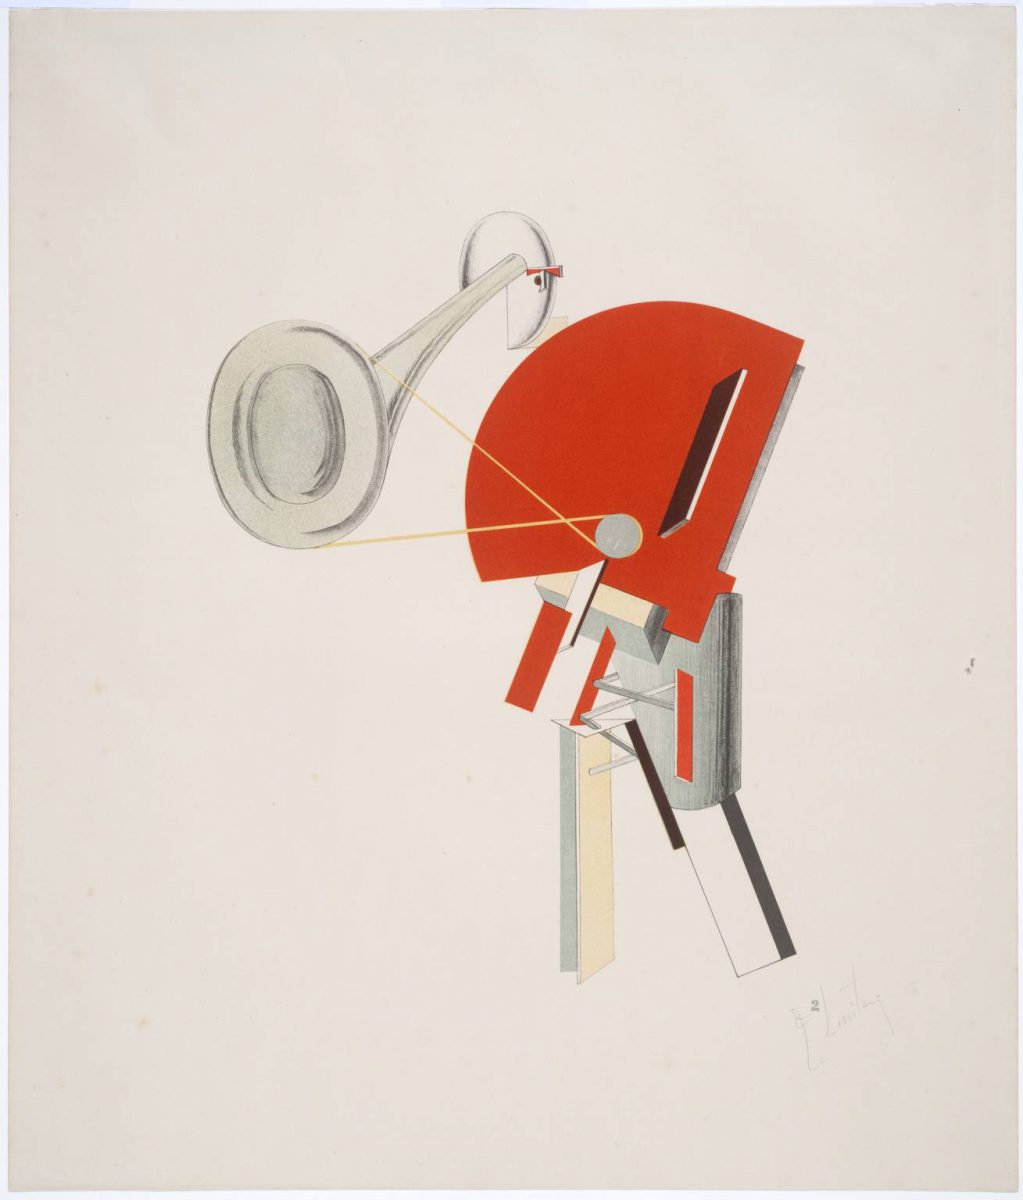 The Announcer 1923 by El Lissitzky 1890-1941